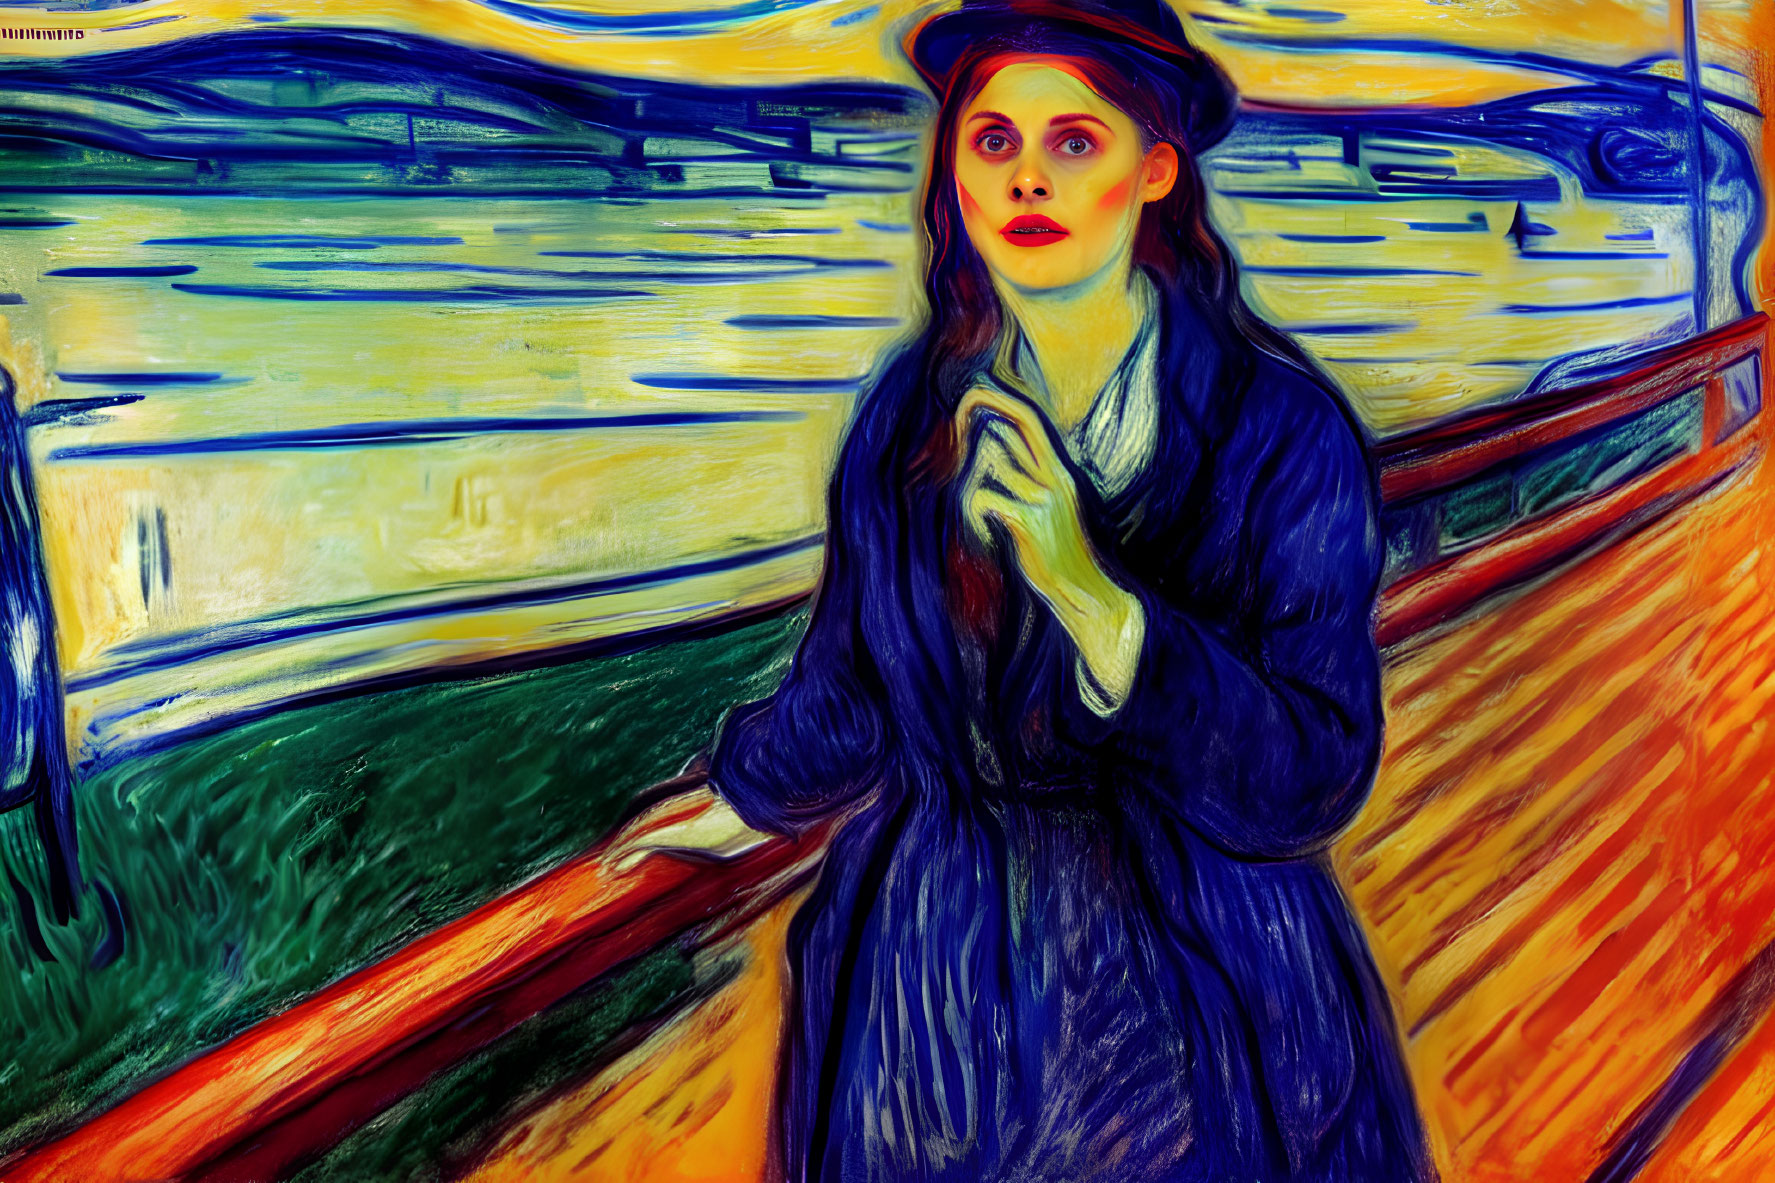 Woman in Blue Coat Standing by Rail Against Vibrant Abstract Background